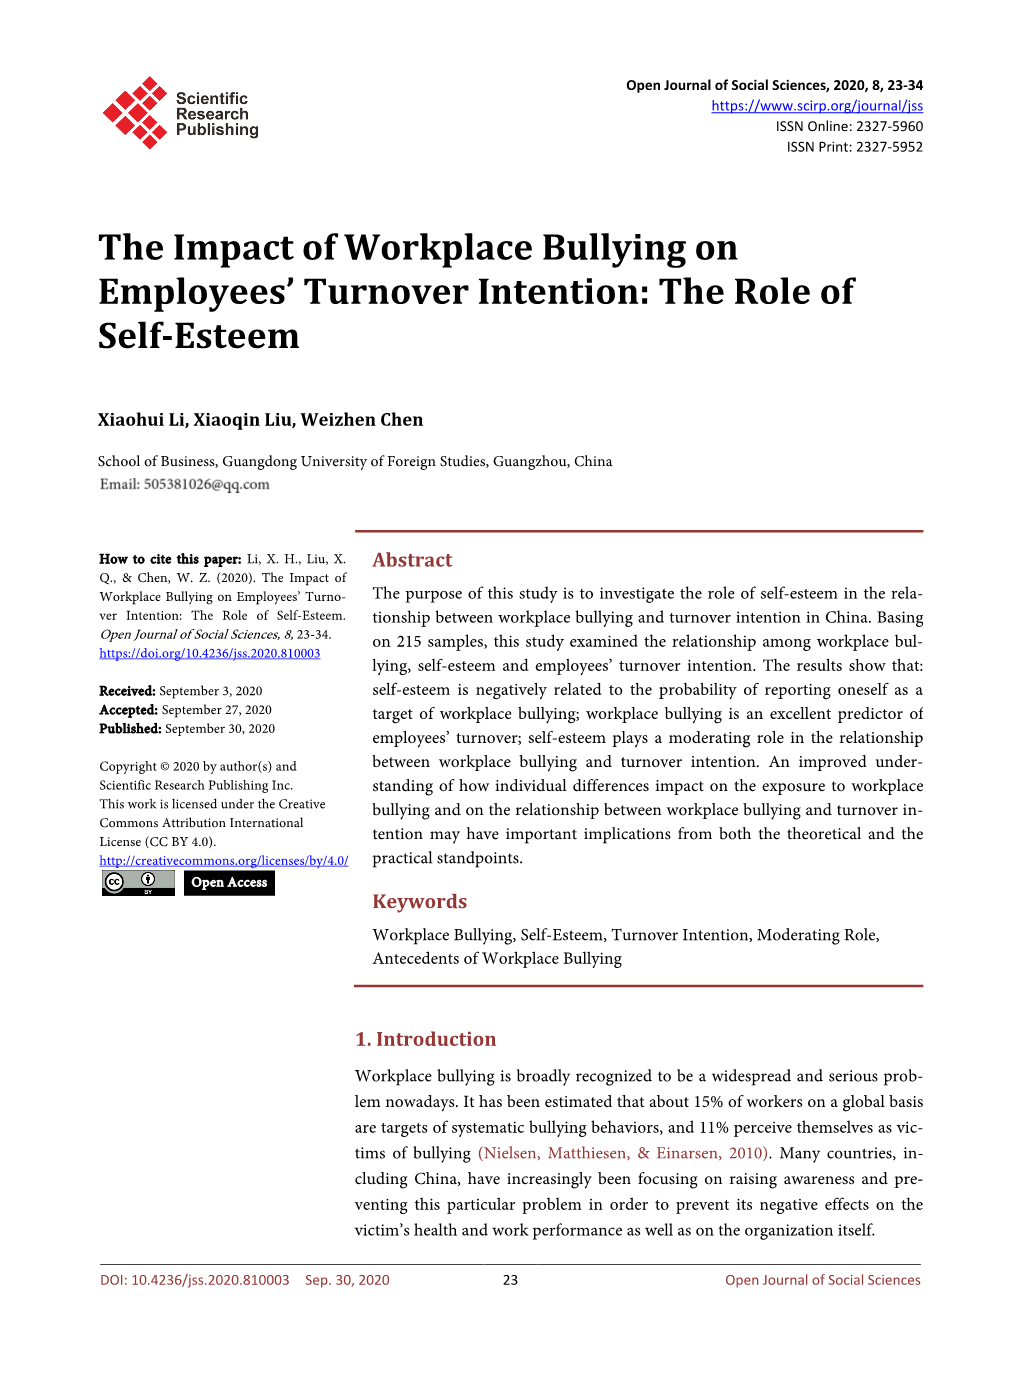 The Impact of Workplace Bullying on Employees' Turnover Intention